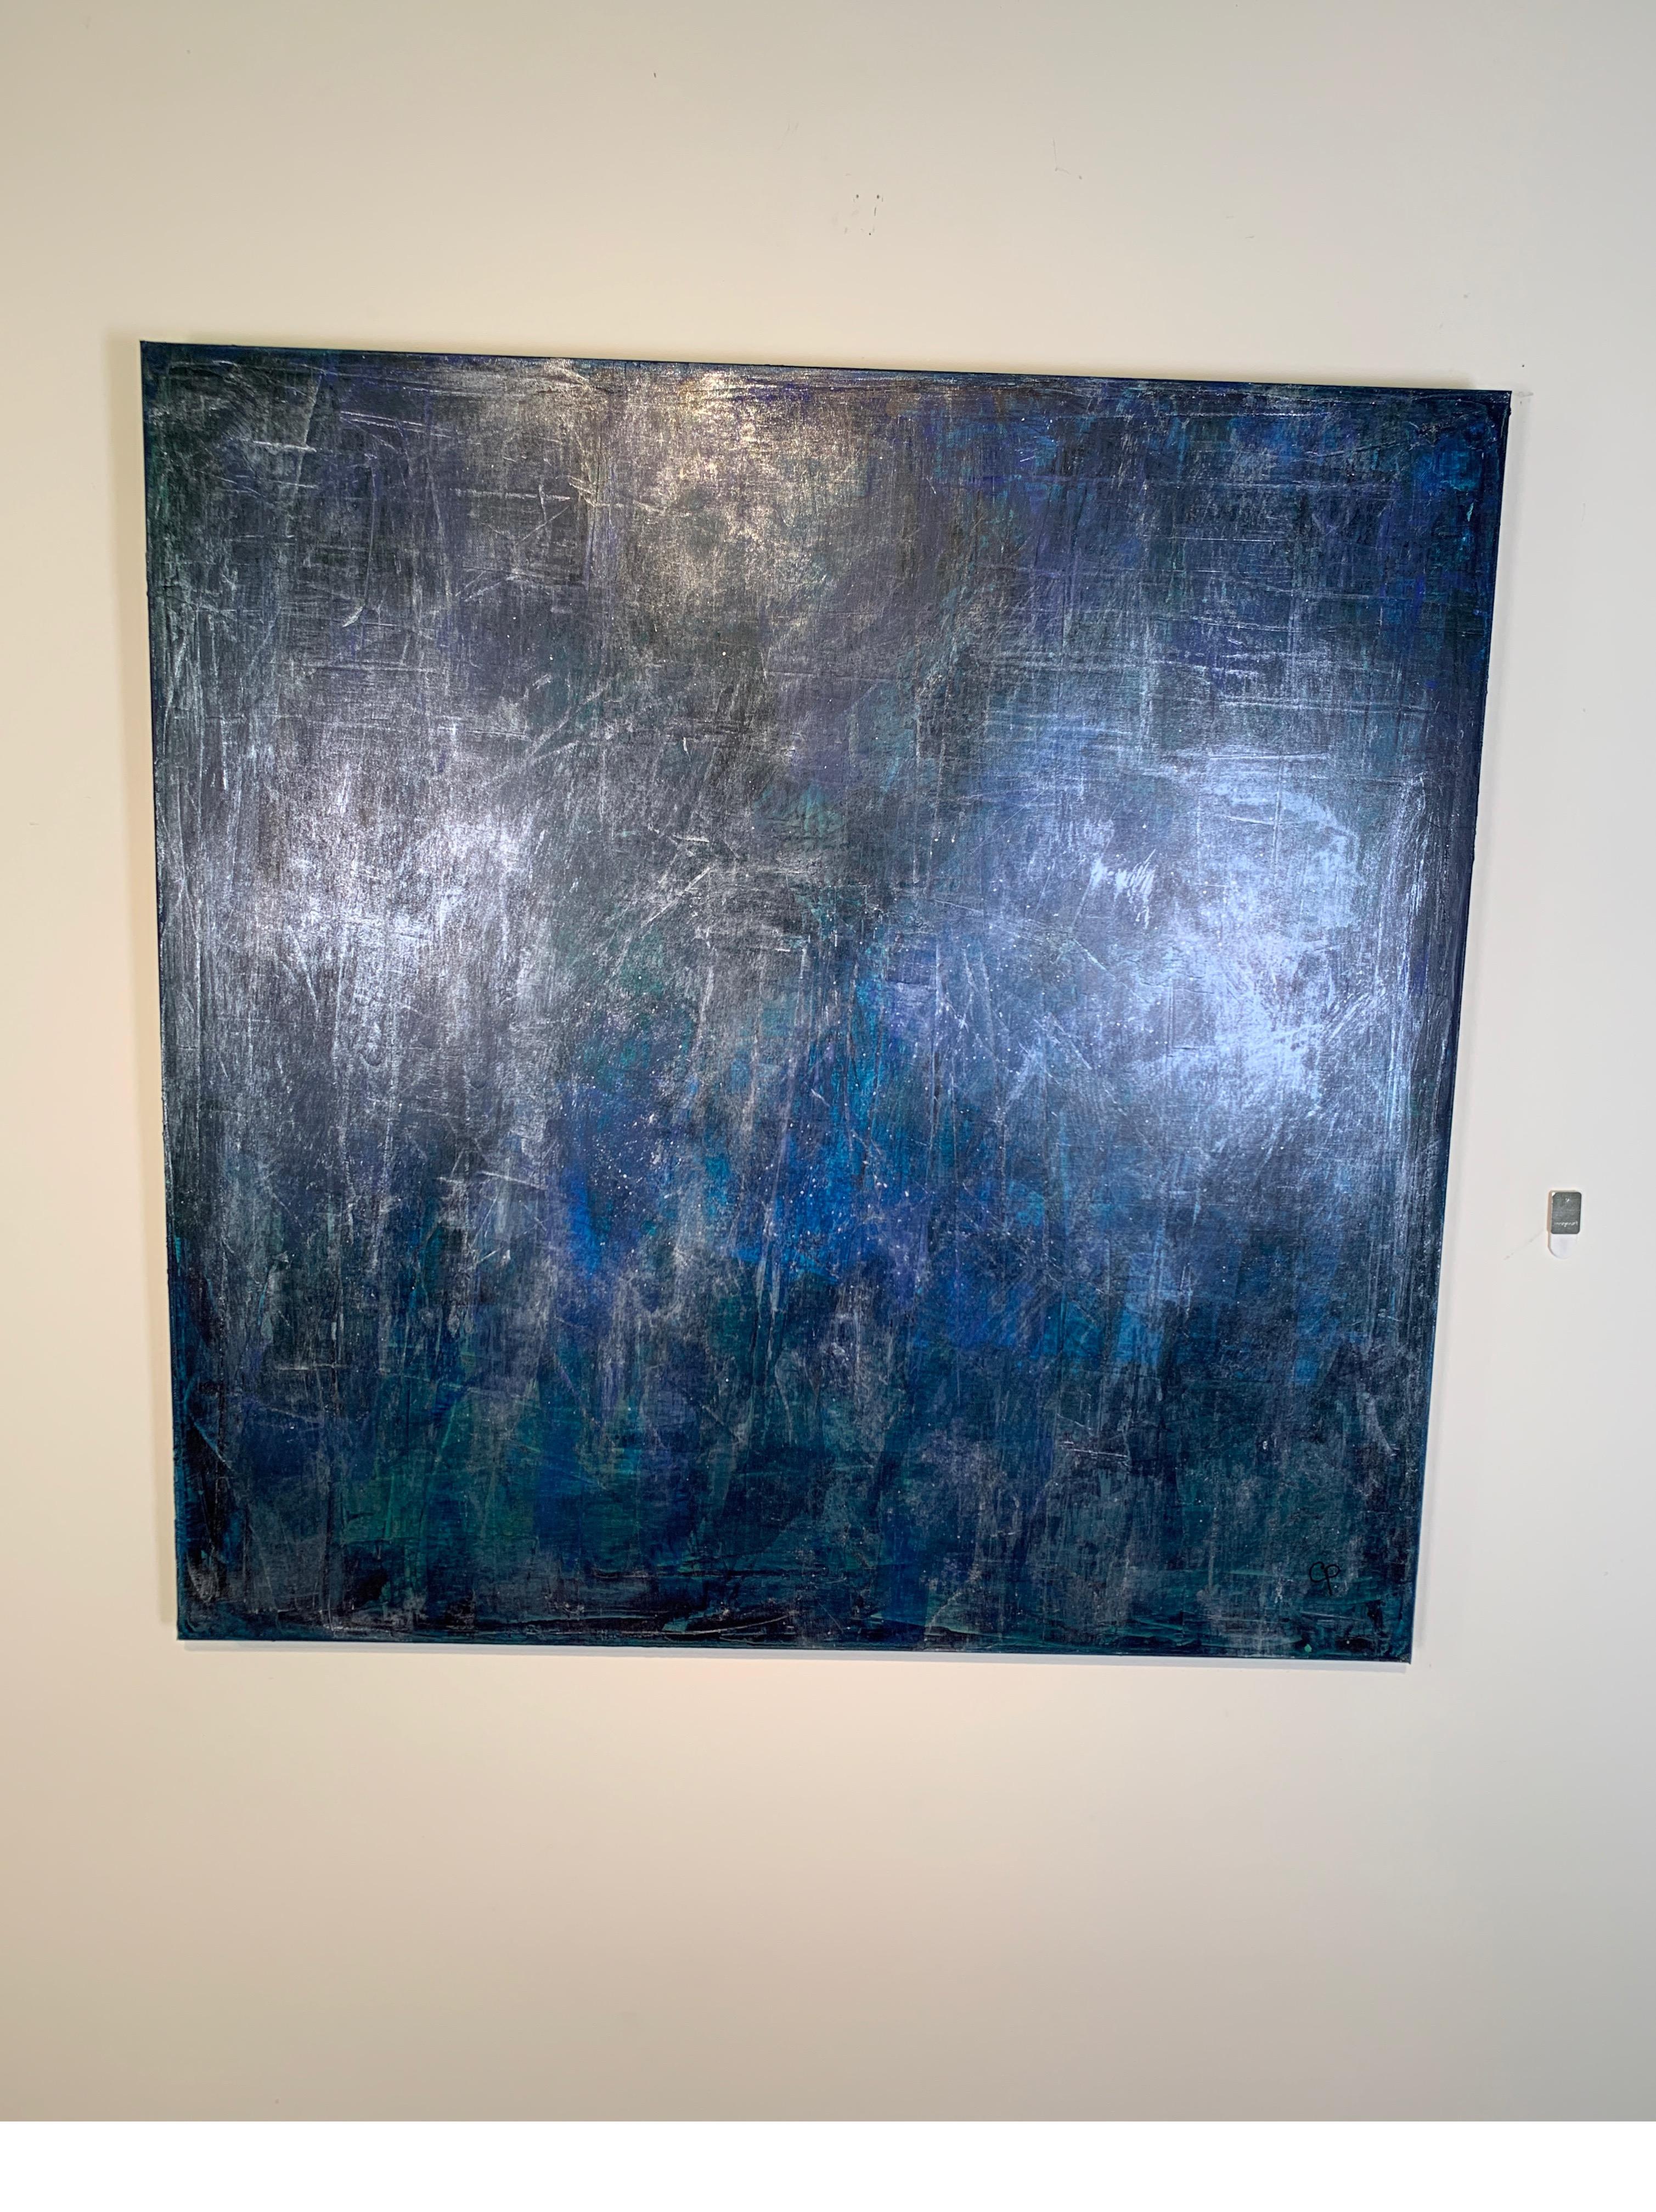 Contemporary artist Carol Post’s intention is not to define a scene but to create space for the imagination to expand and one’s life experiences to uniquely saturate any moment spent with the piece. This also describes her process which is rooted in